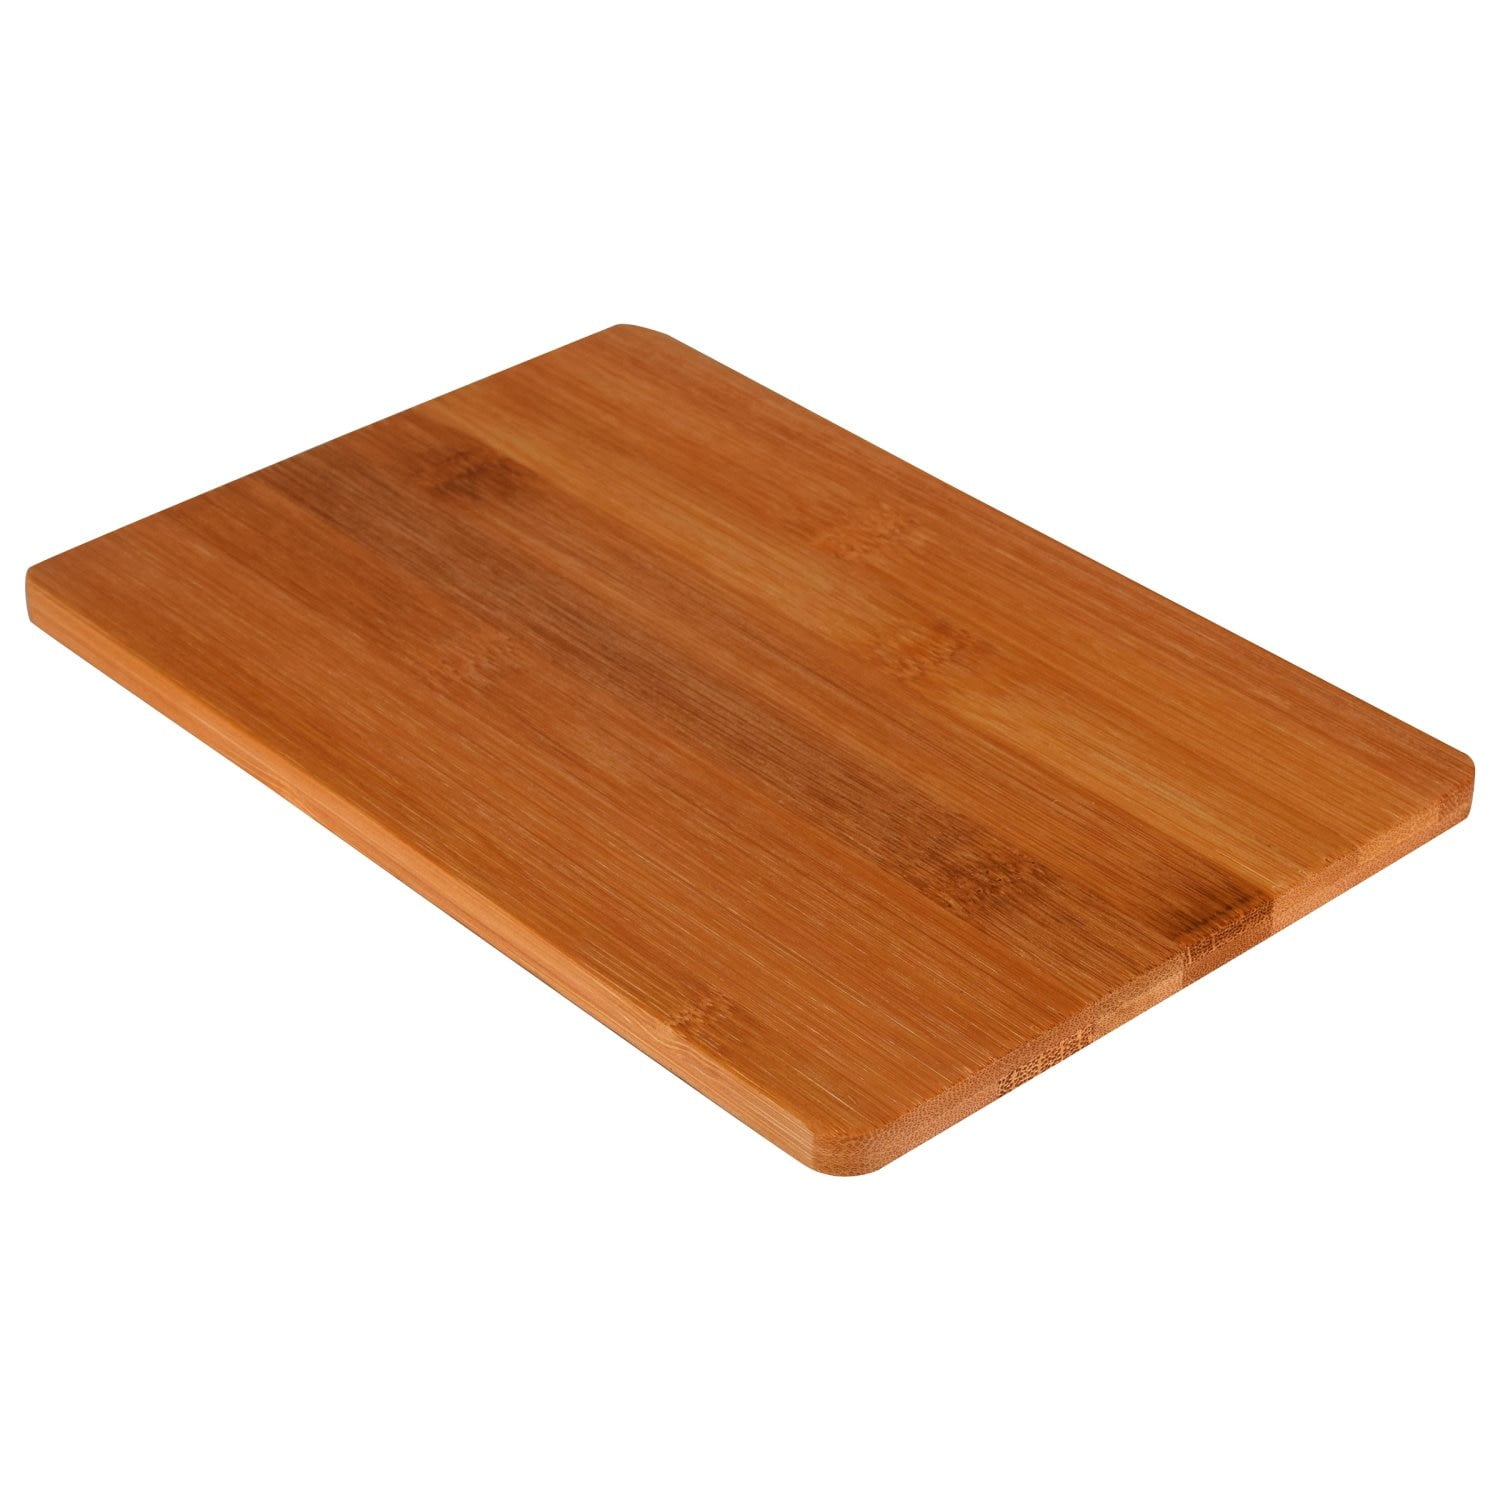 Details about   Luxury end grain cutting board